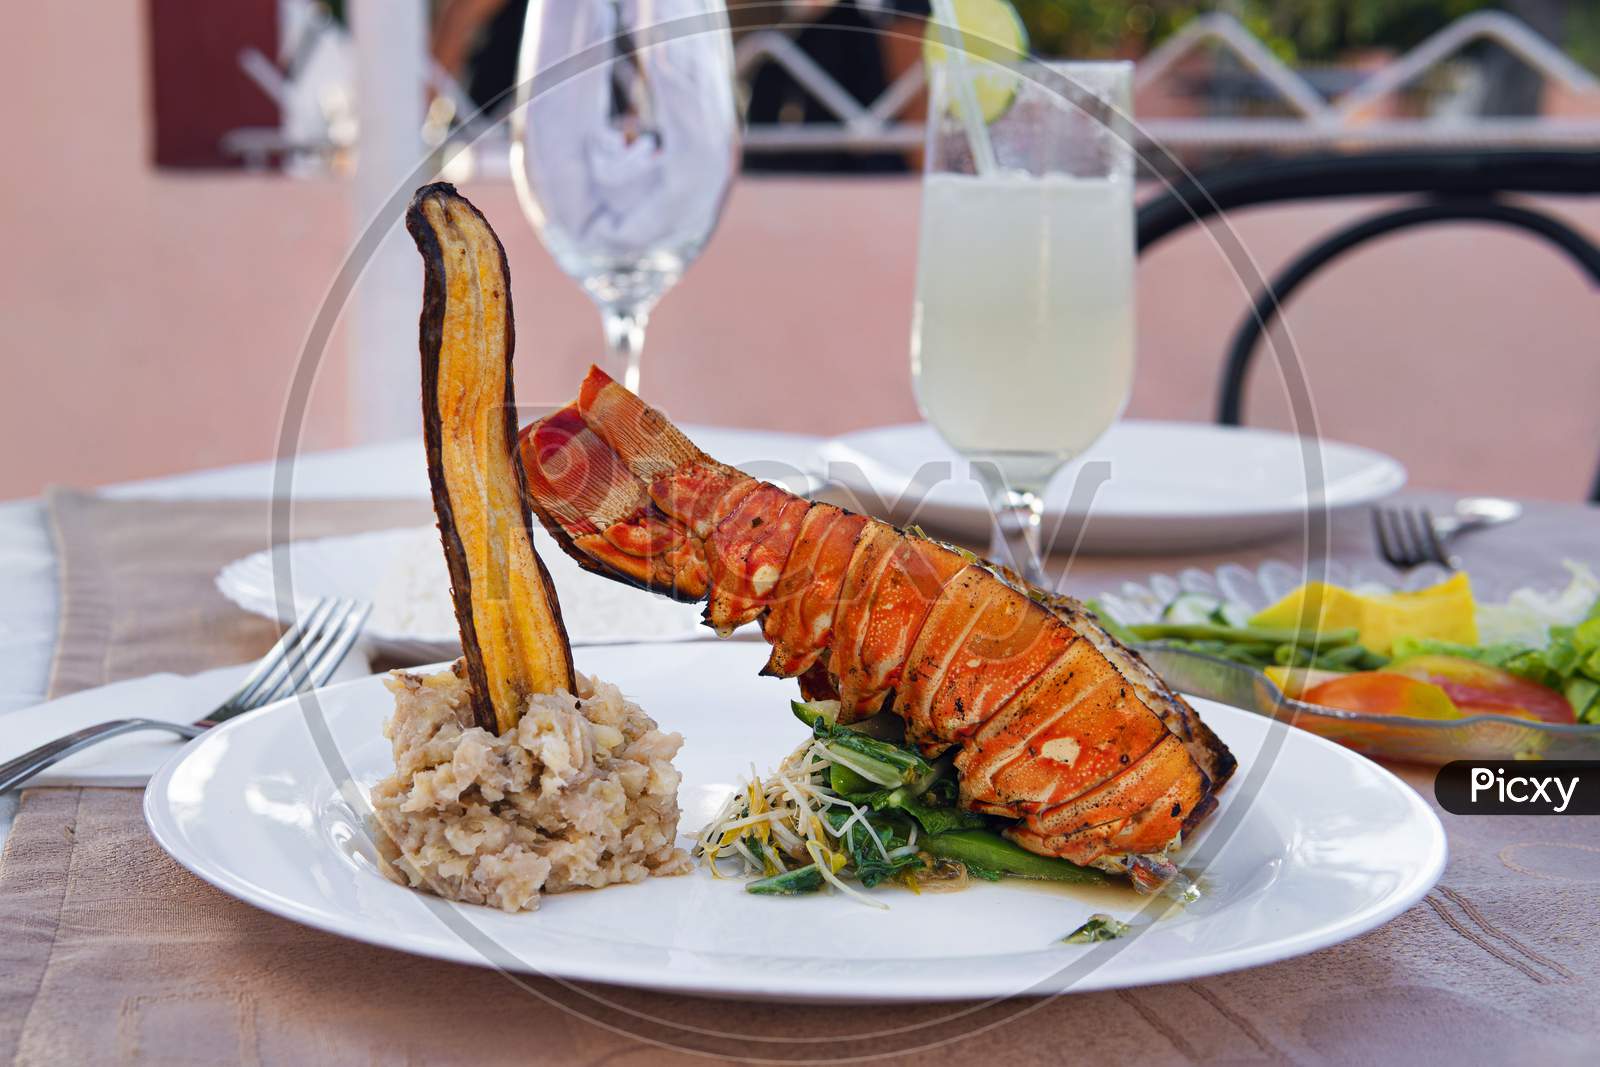 Grilled Lobster Is Beautifully Placed On A Plate Along With A Side Dish Of Mashed Potatoes, Fried Banana, Vegetables, Rice And A Glass Of Cocktail. Expensive Dinner At A Restaurant